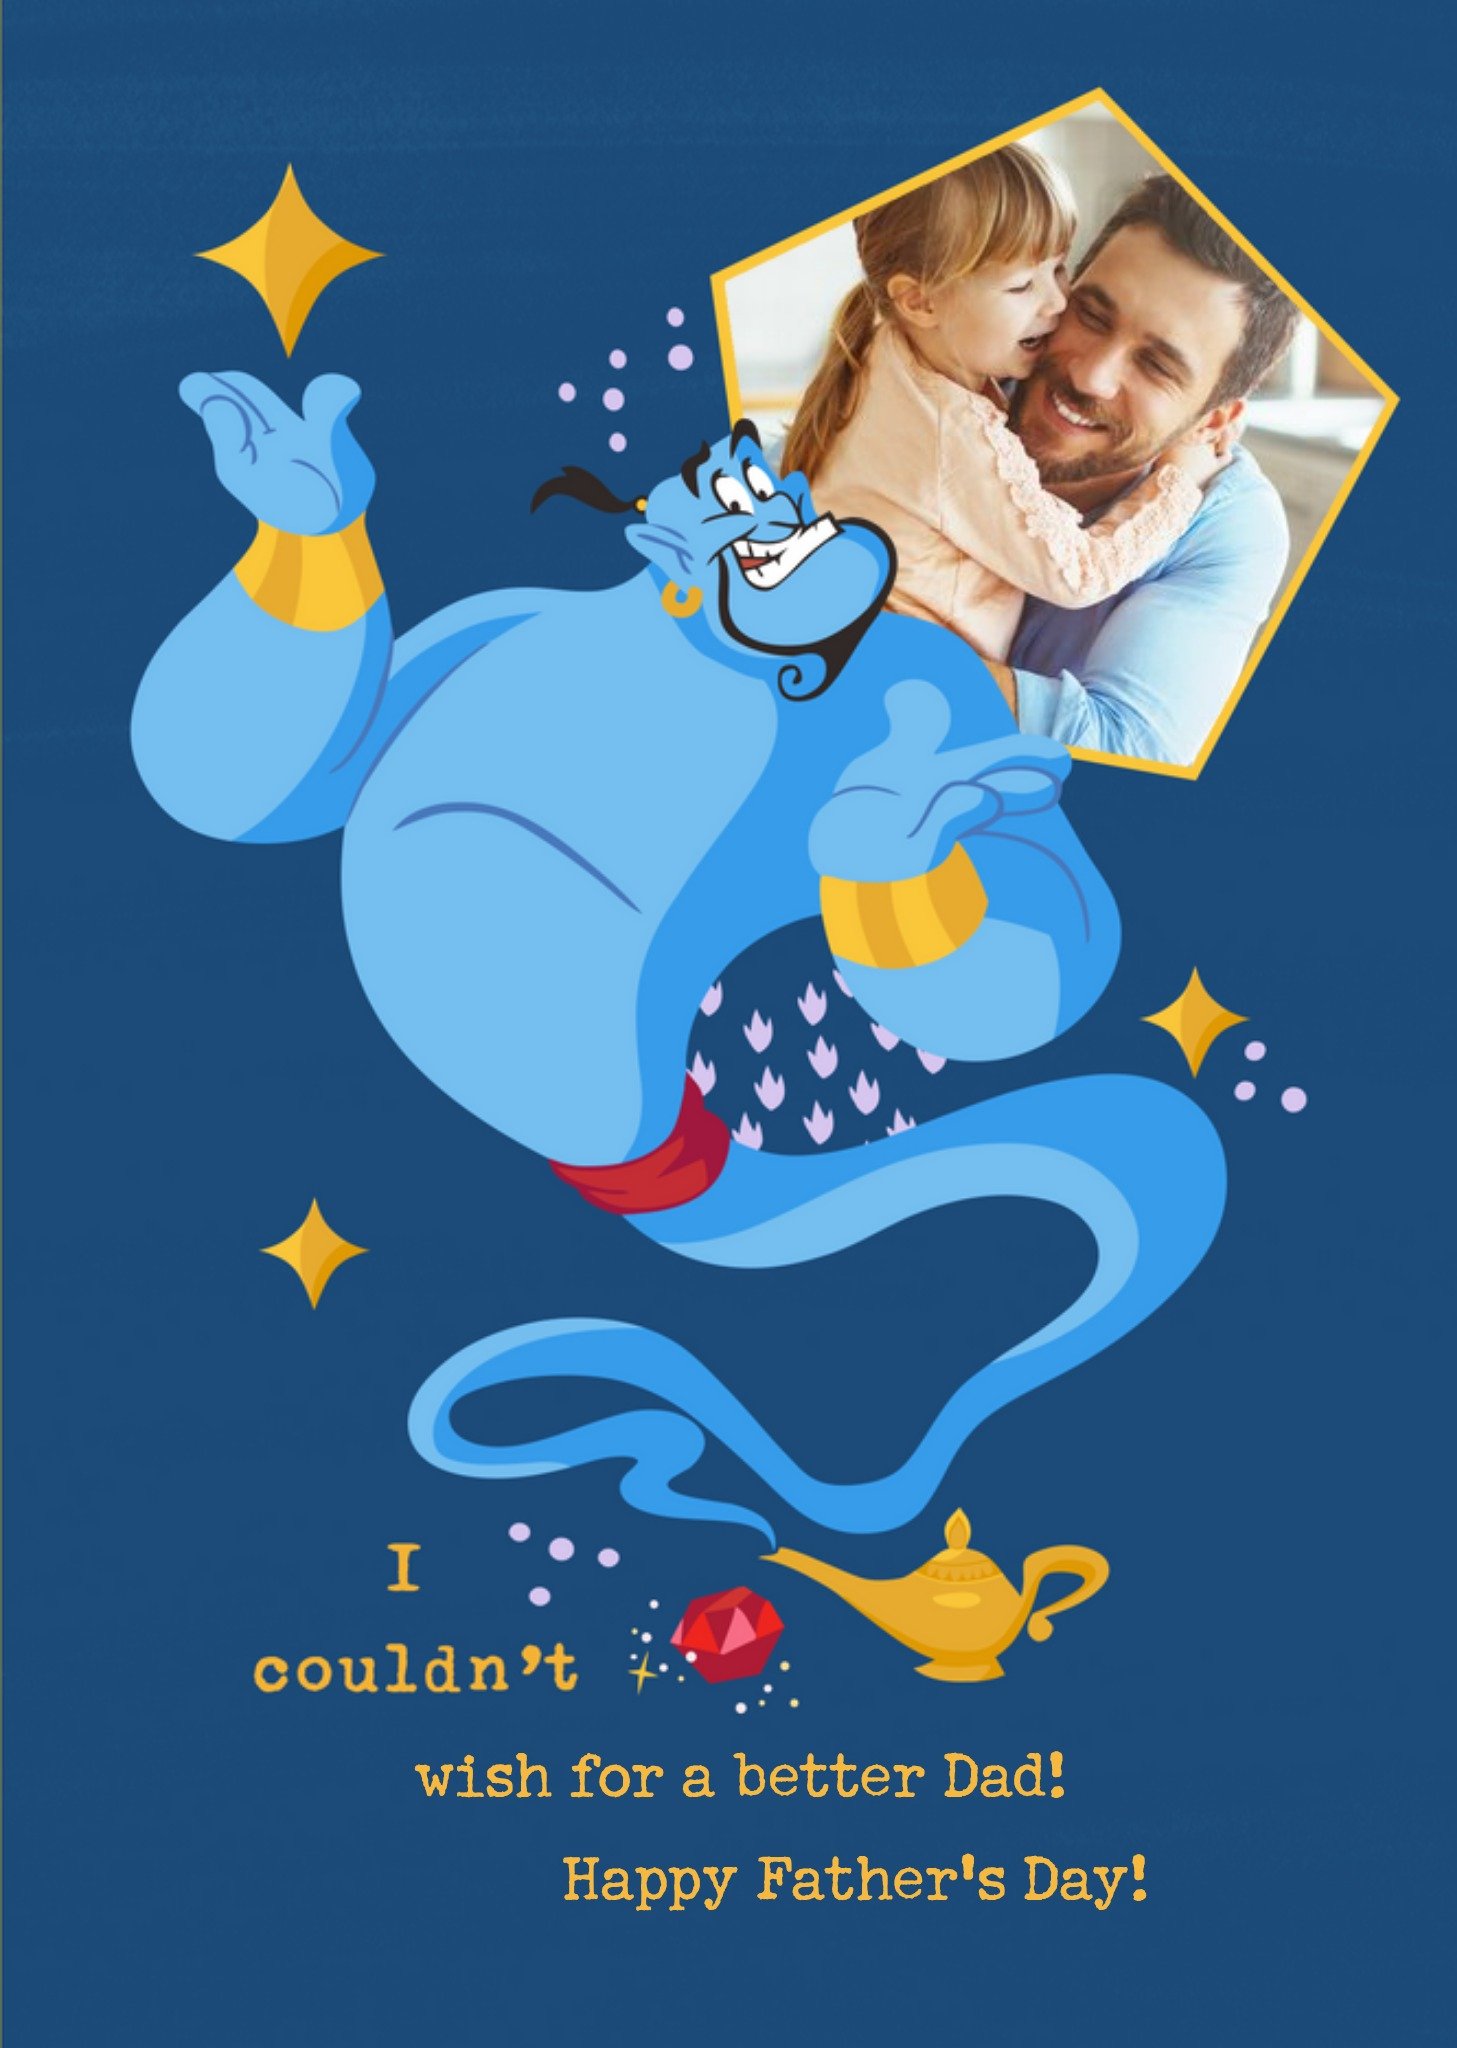 Disney Aladdin Genie Could Not Wish For A Better Dad Fathers Day Card Ecard